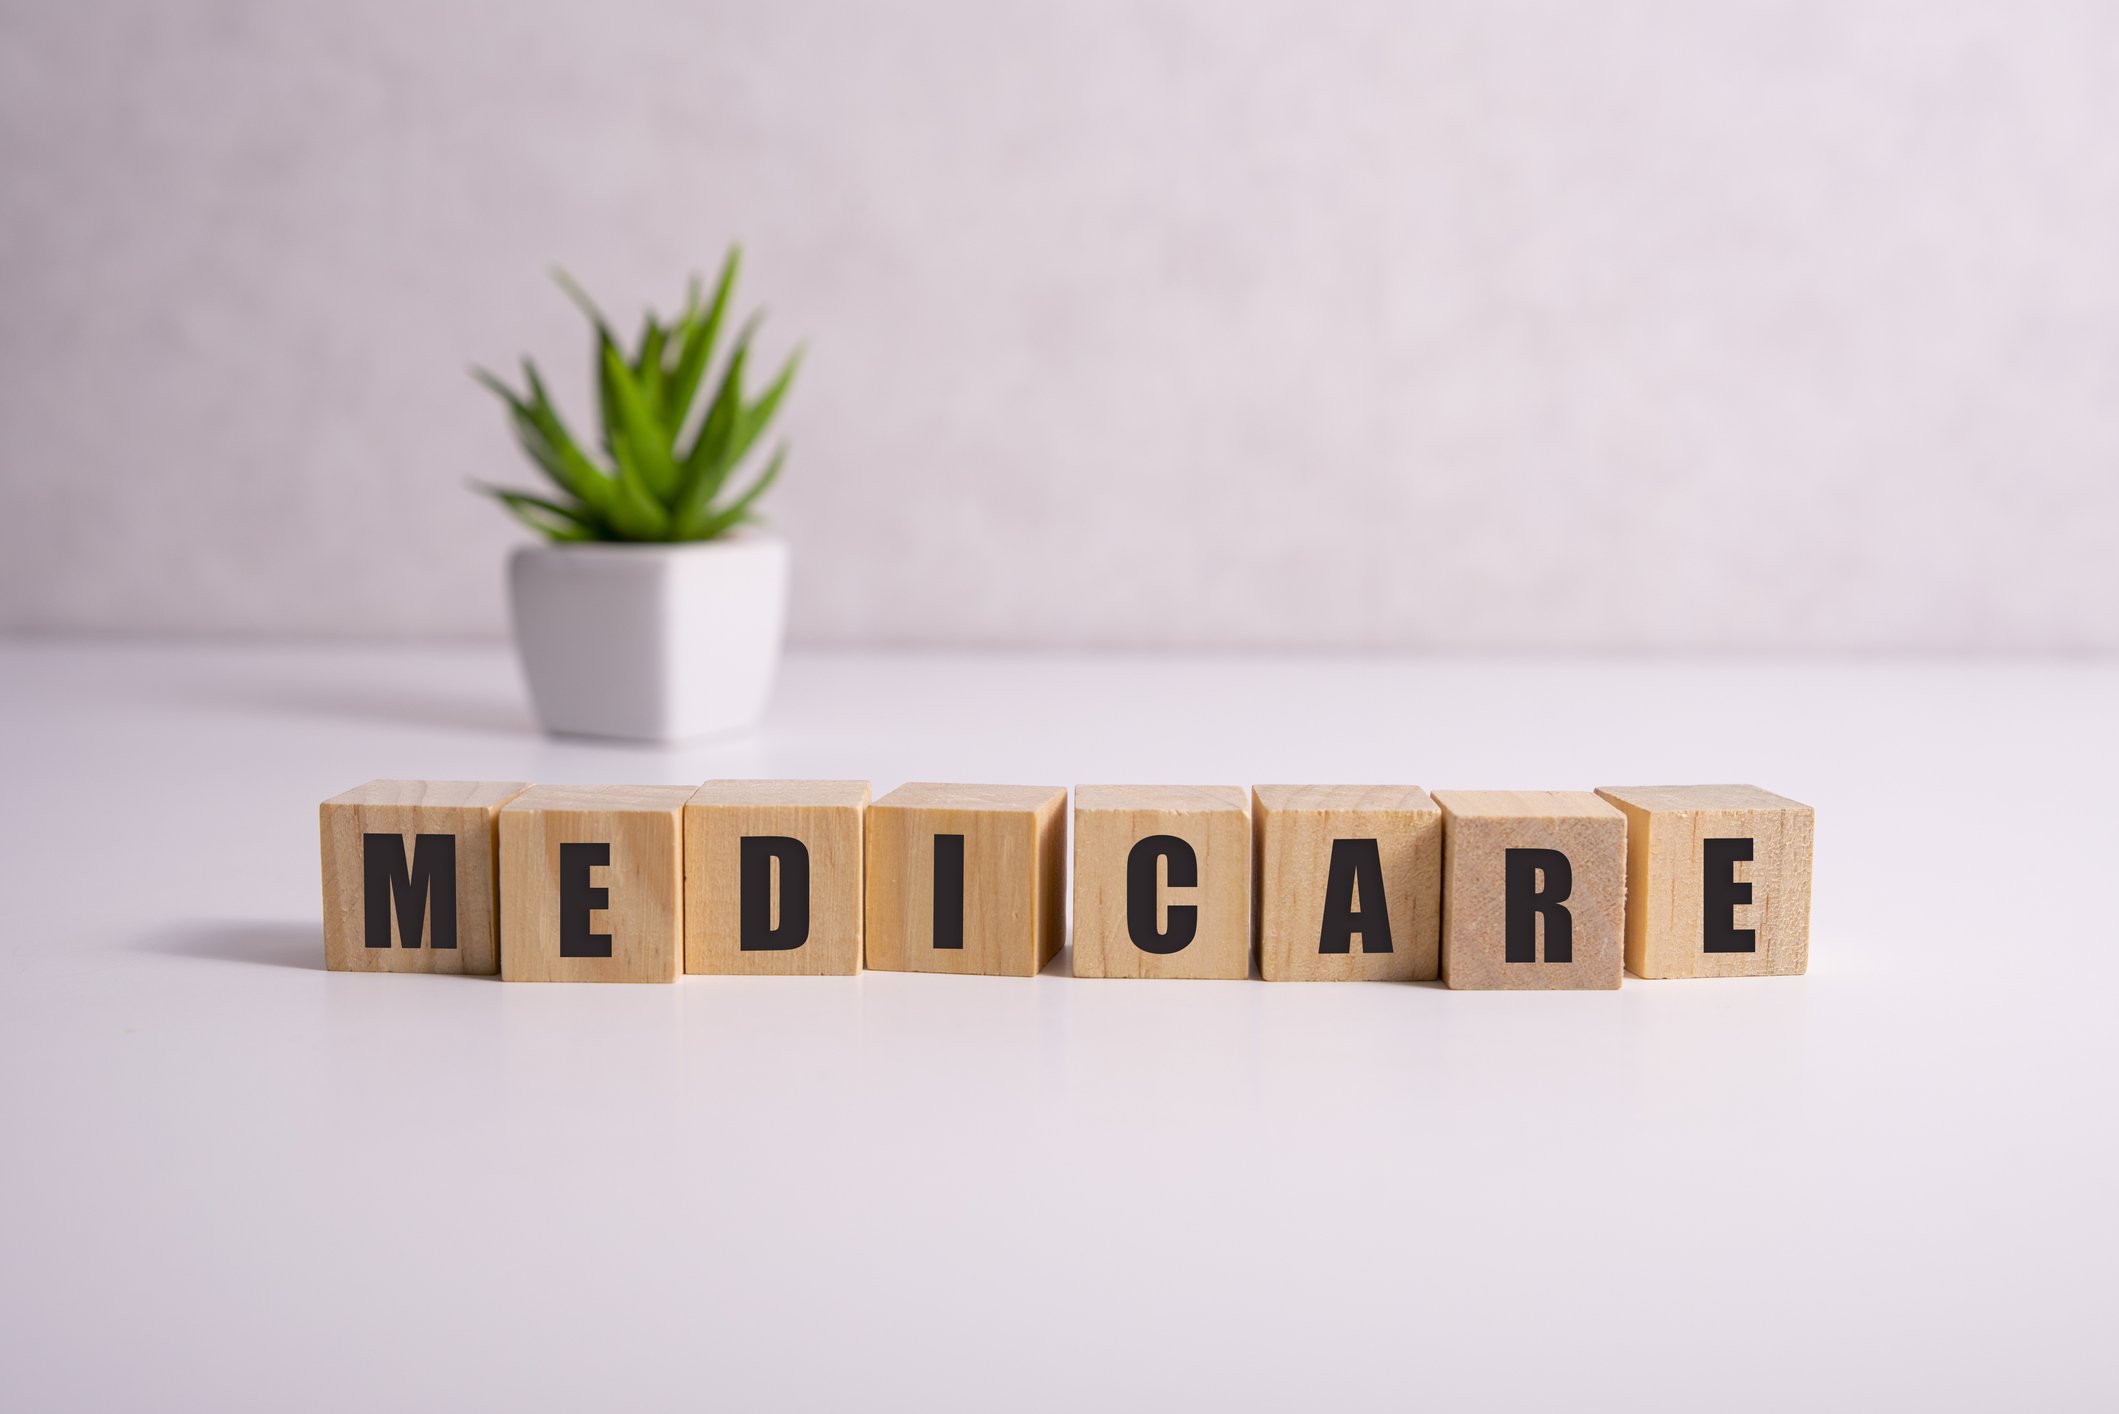 B.A. Schrock Financial Group | 3 Questions You May Have About Medicare